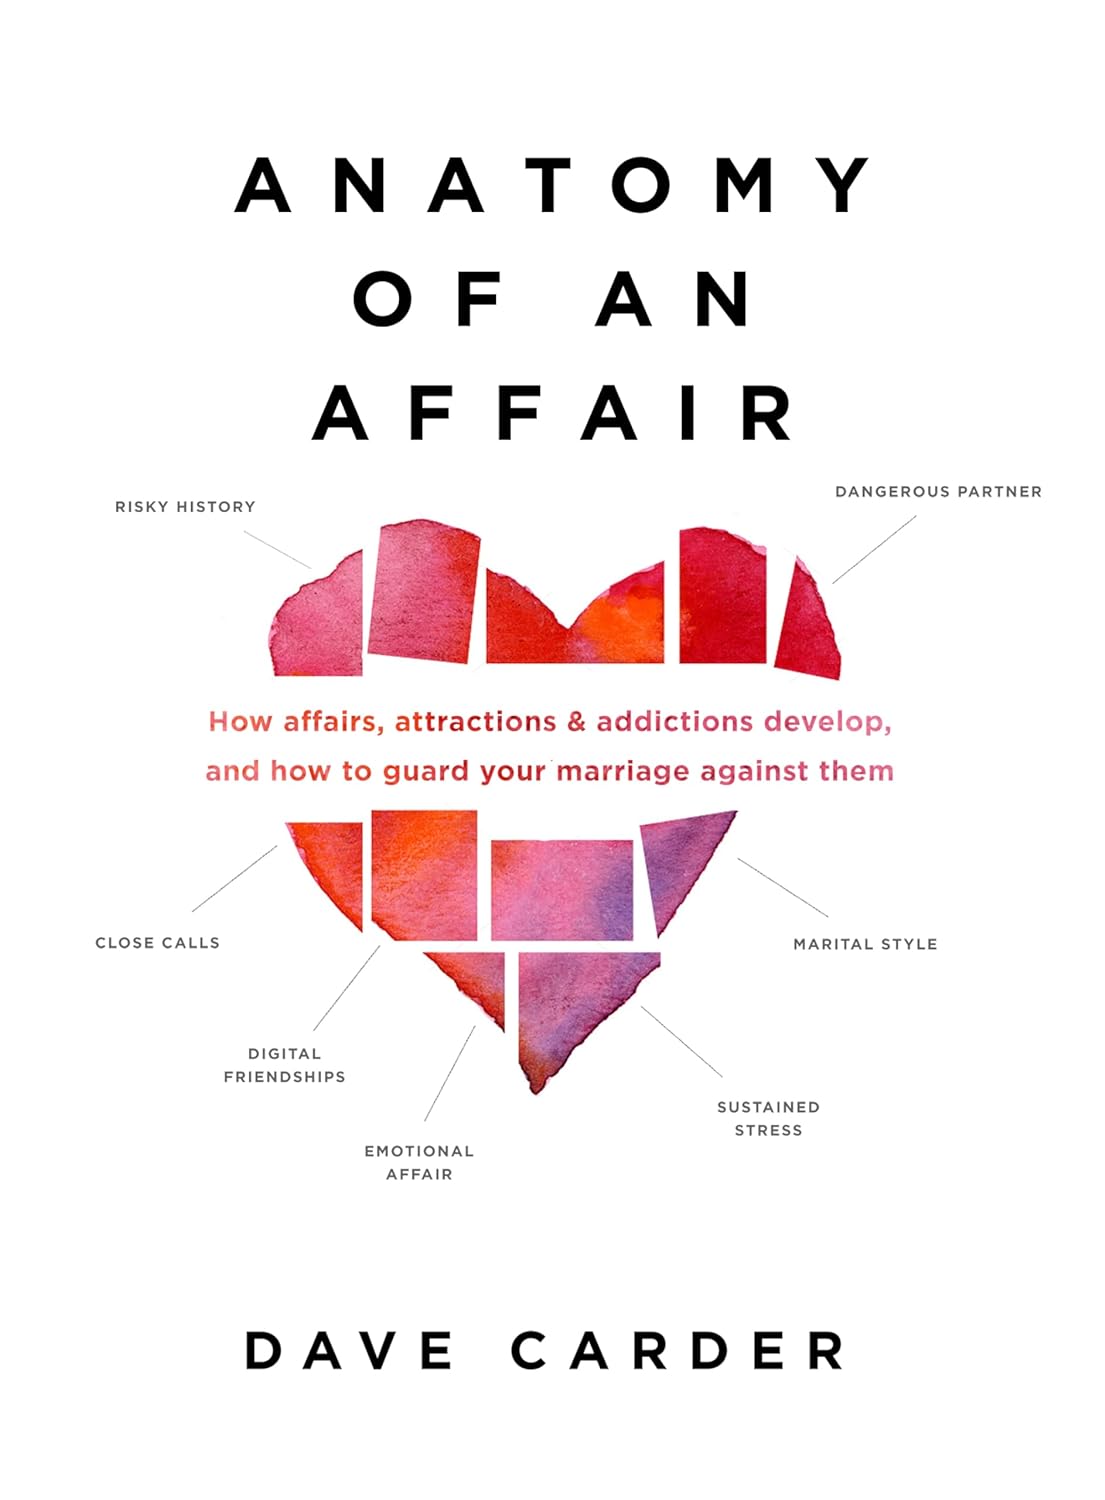 Anatomy of An Affair Book Recommended By Briana Lefman at Hamsa Healing Space - Book